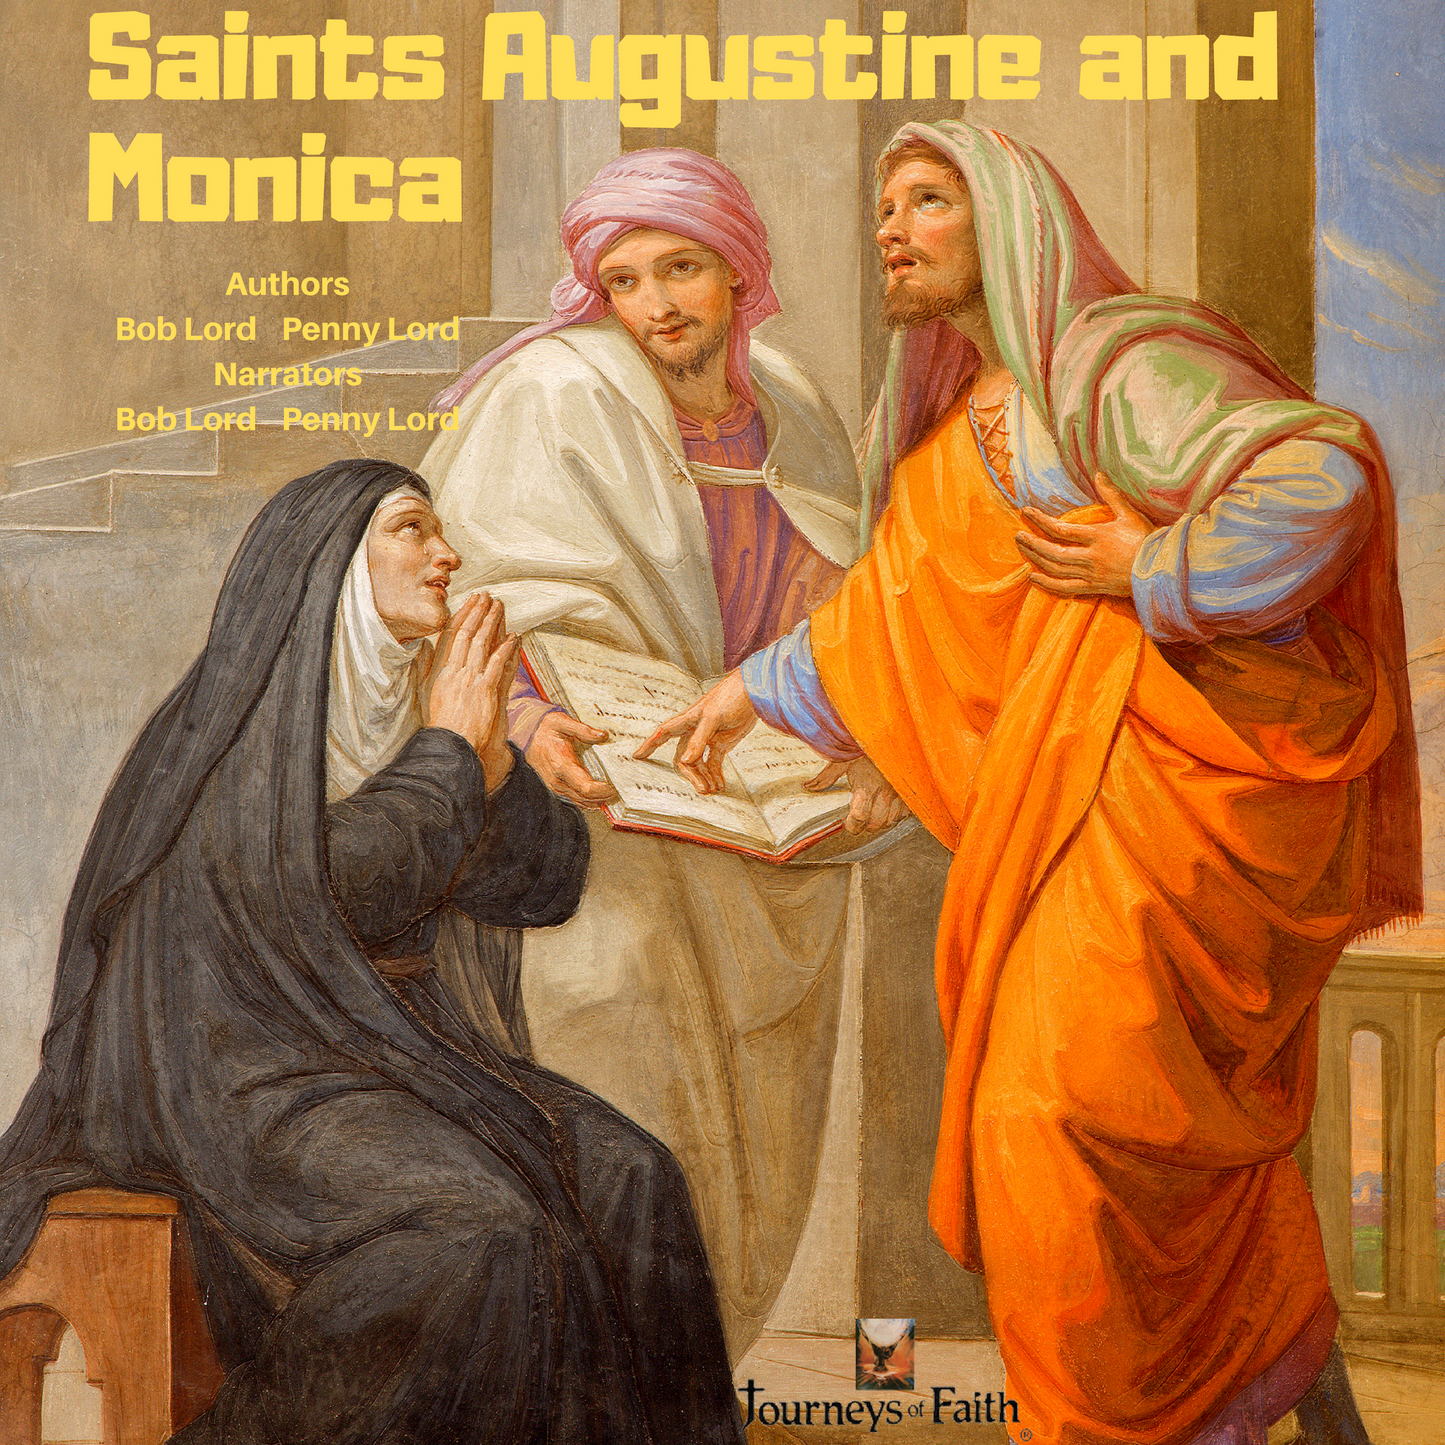 Saint Augustine and Saint Monica Audiobook - Bob and Penny Lord